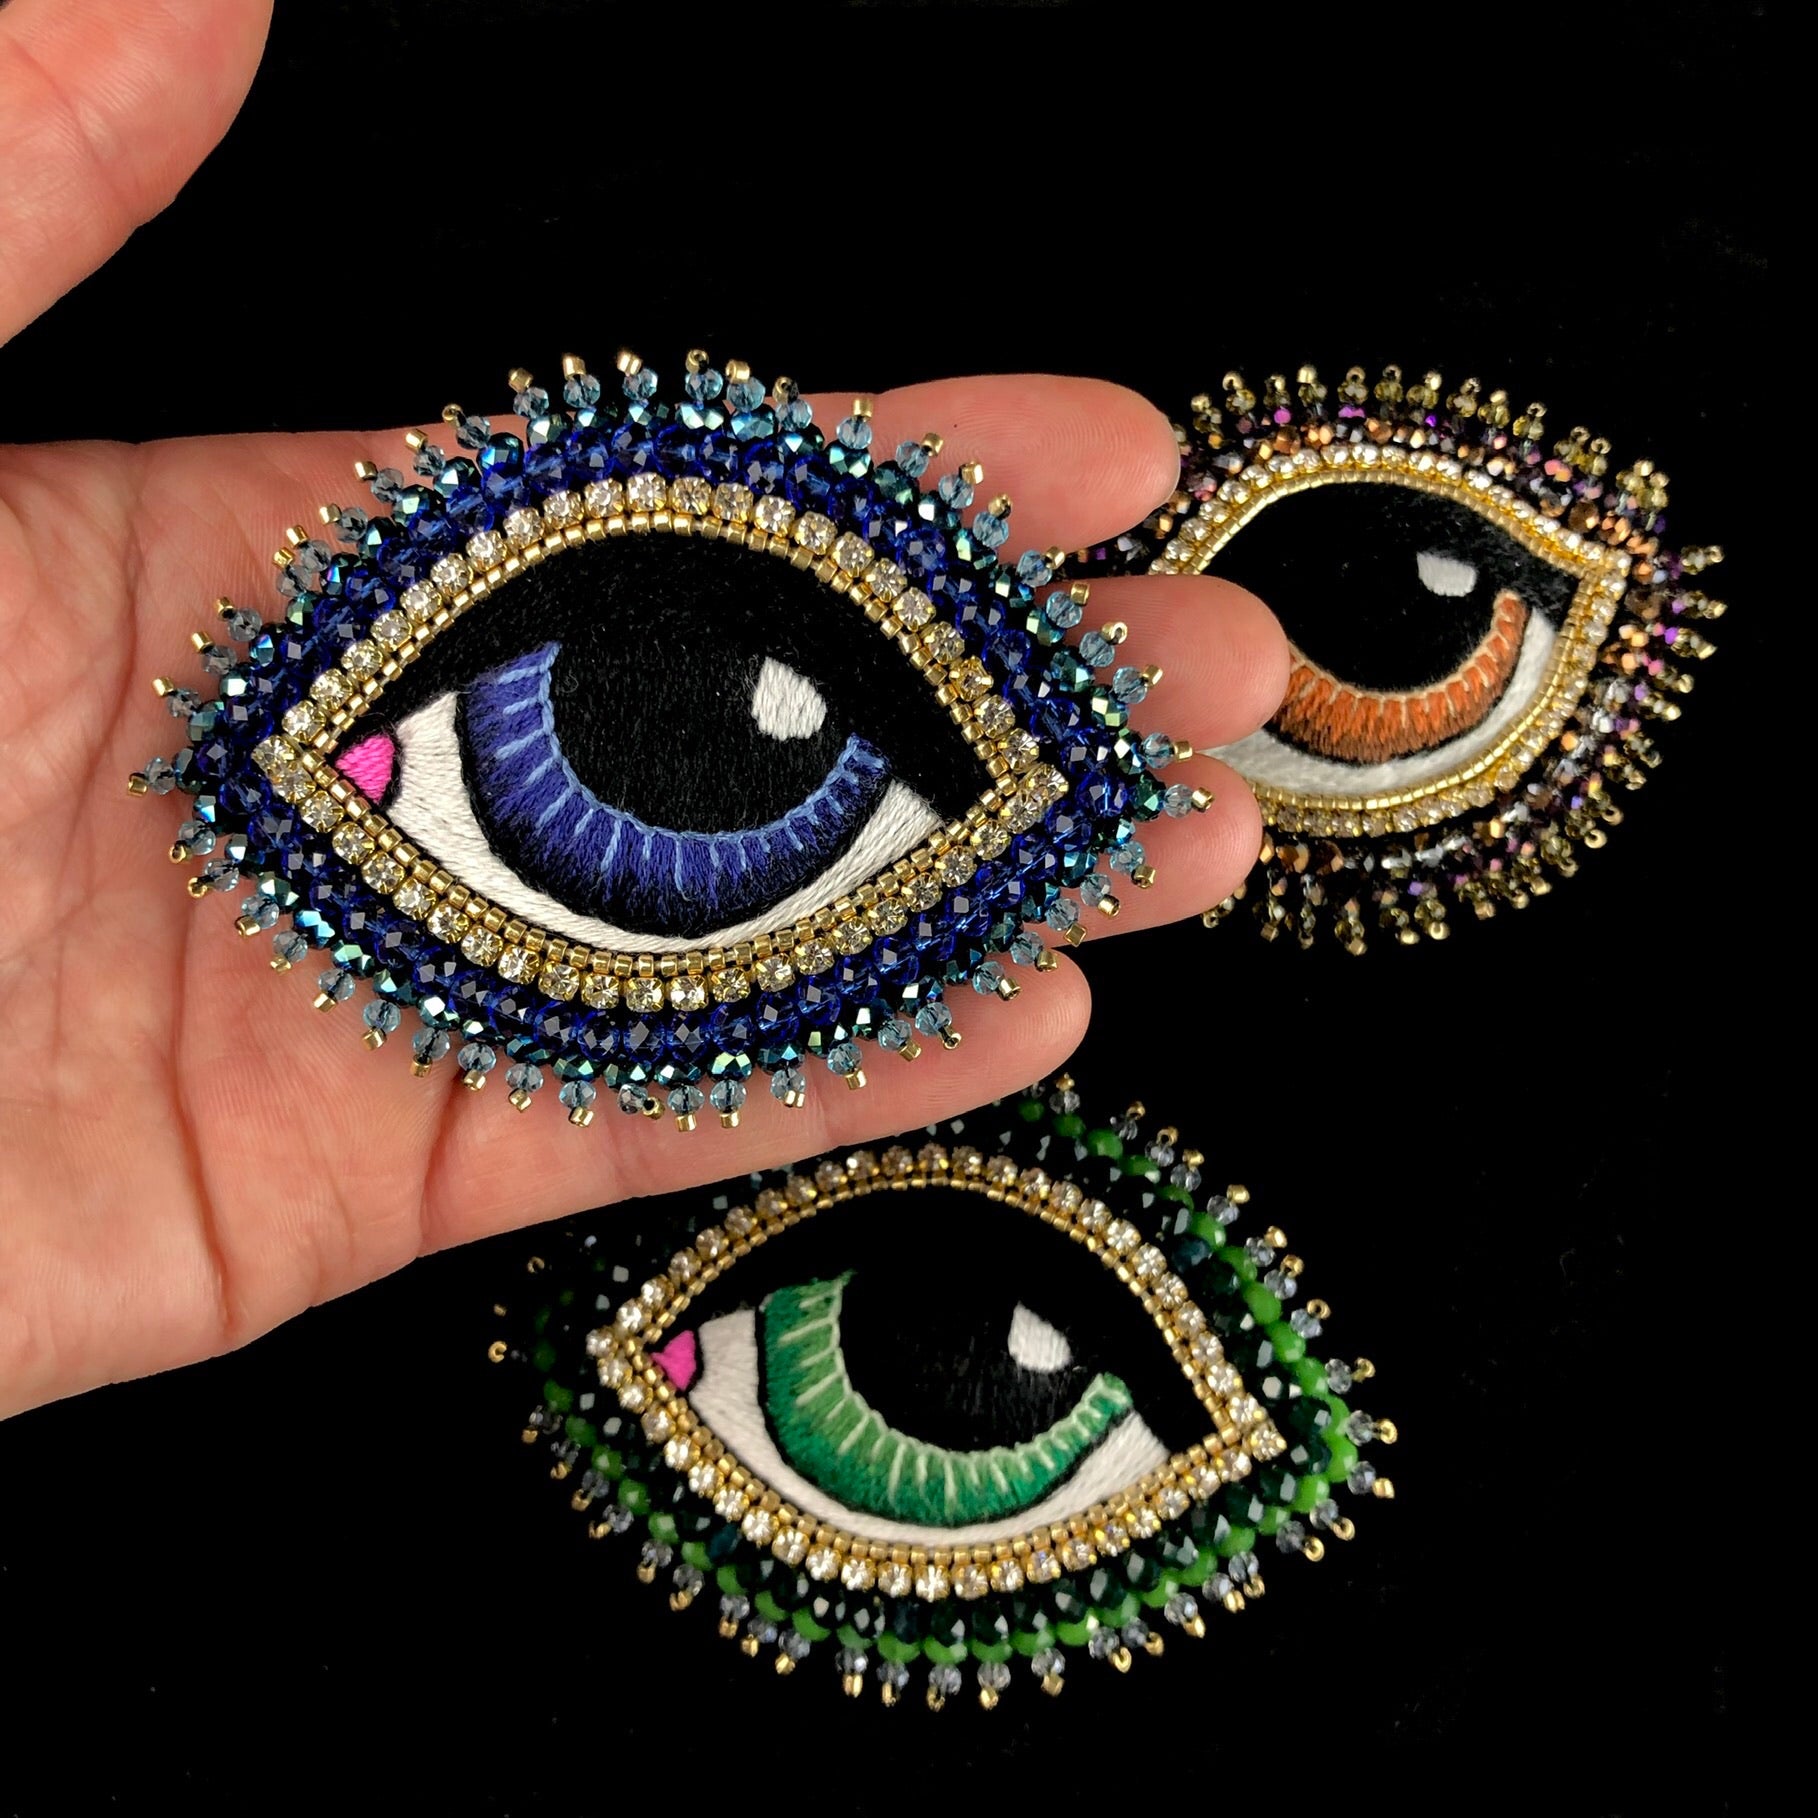 Large Blue Eye Brooch in hand for size referance